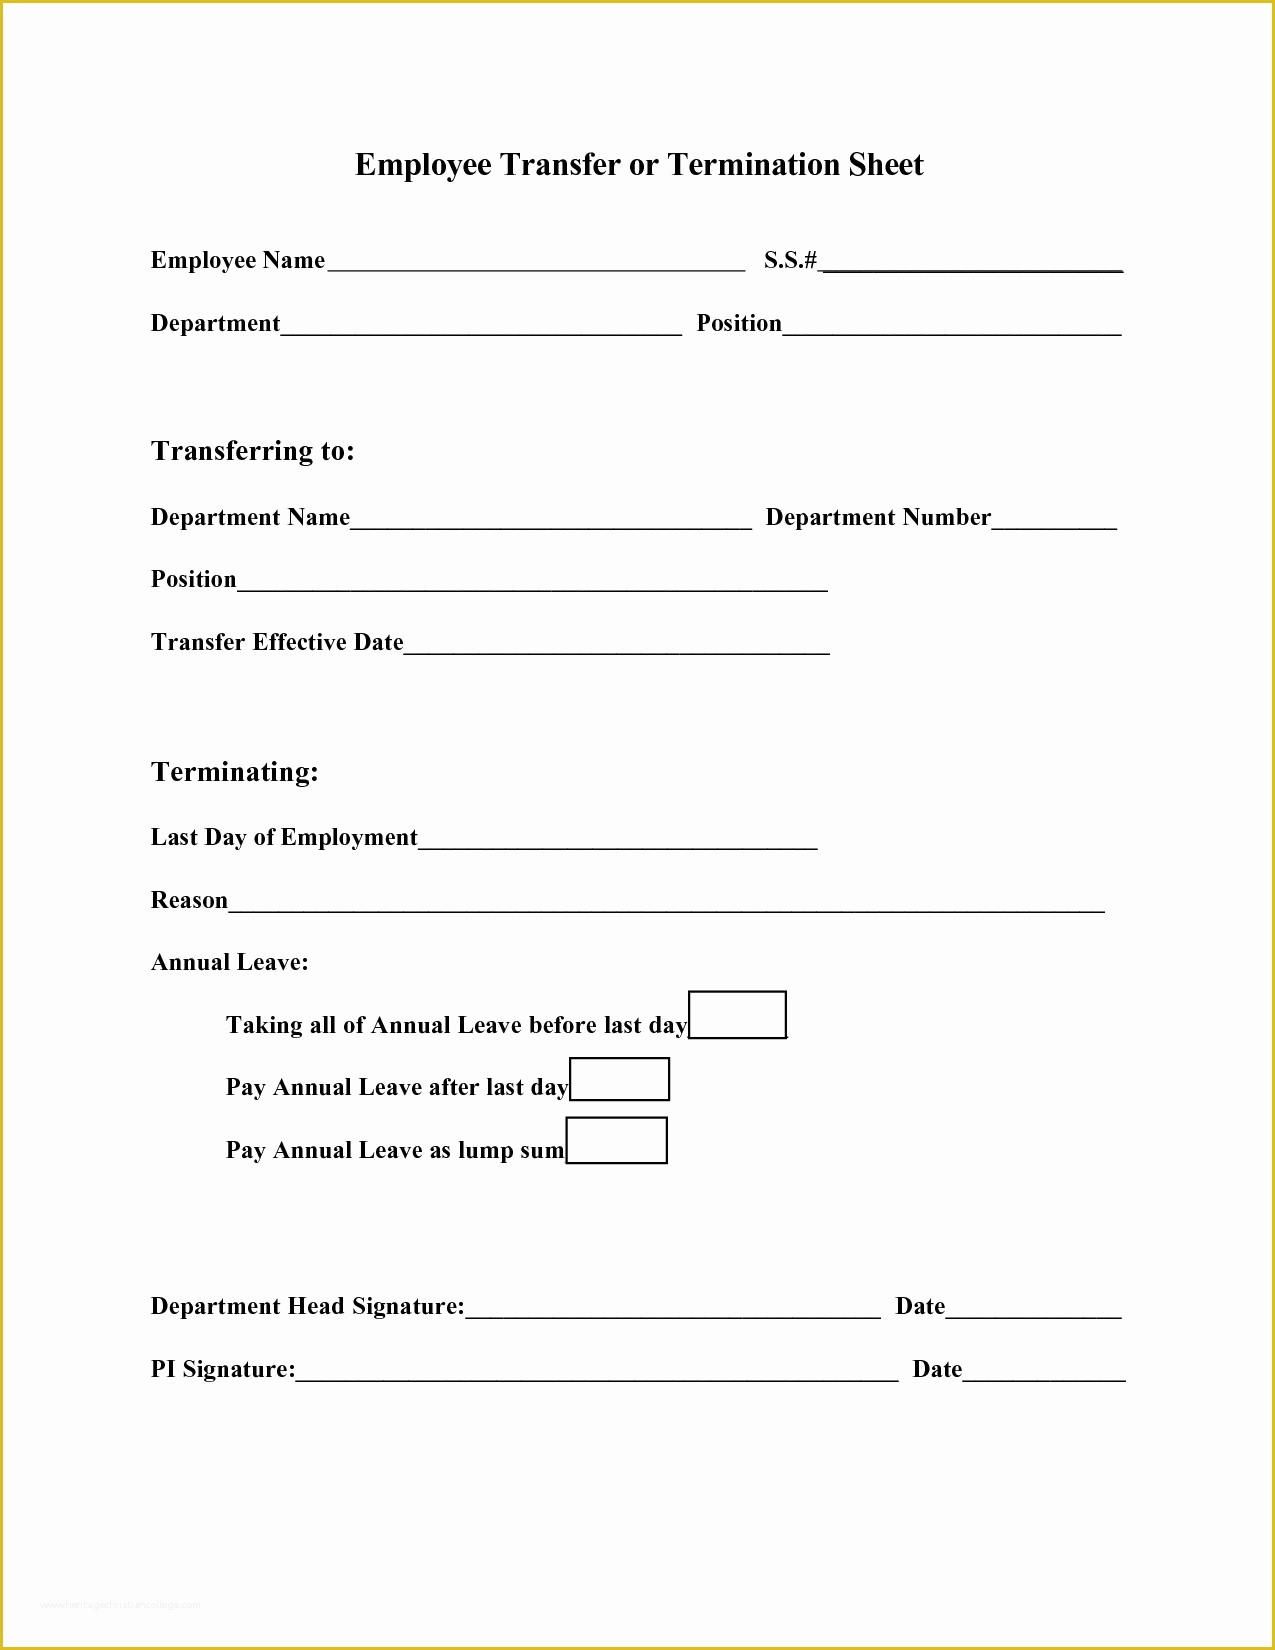 Termination form Template Free Of Best S Of Example Employee Termination forms